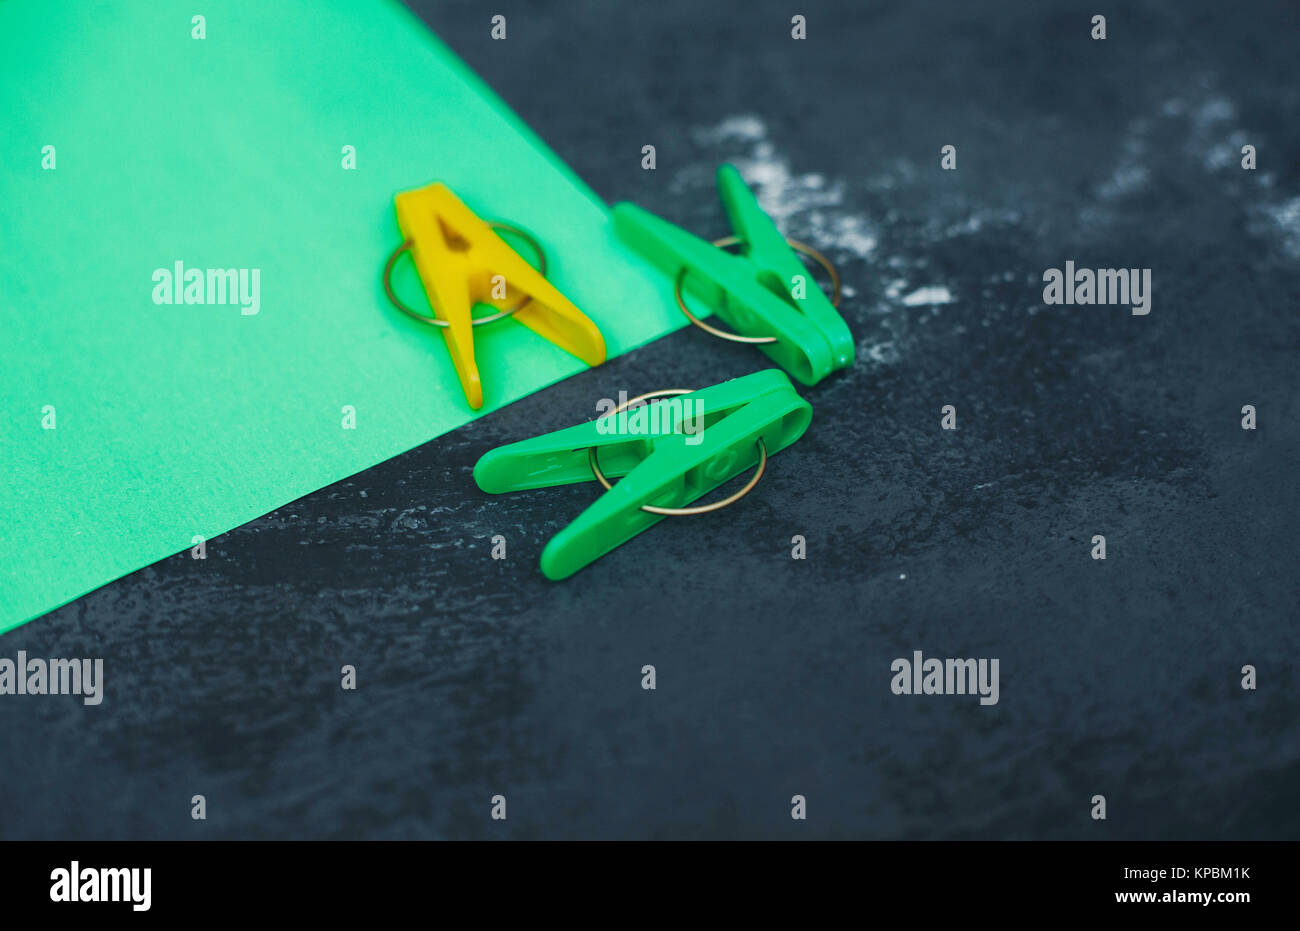 Fun housekeeping with yellow and green plastic clothes pegs. Bright composition of cleaning tools, dark concrete background. Space for your product di Stock Photo